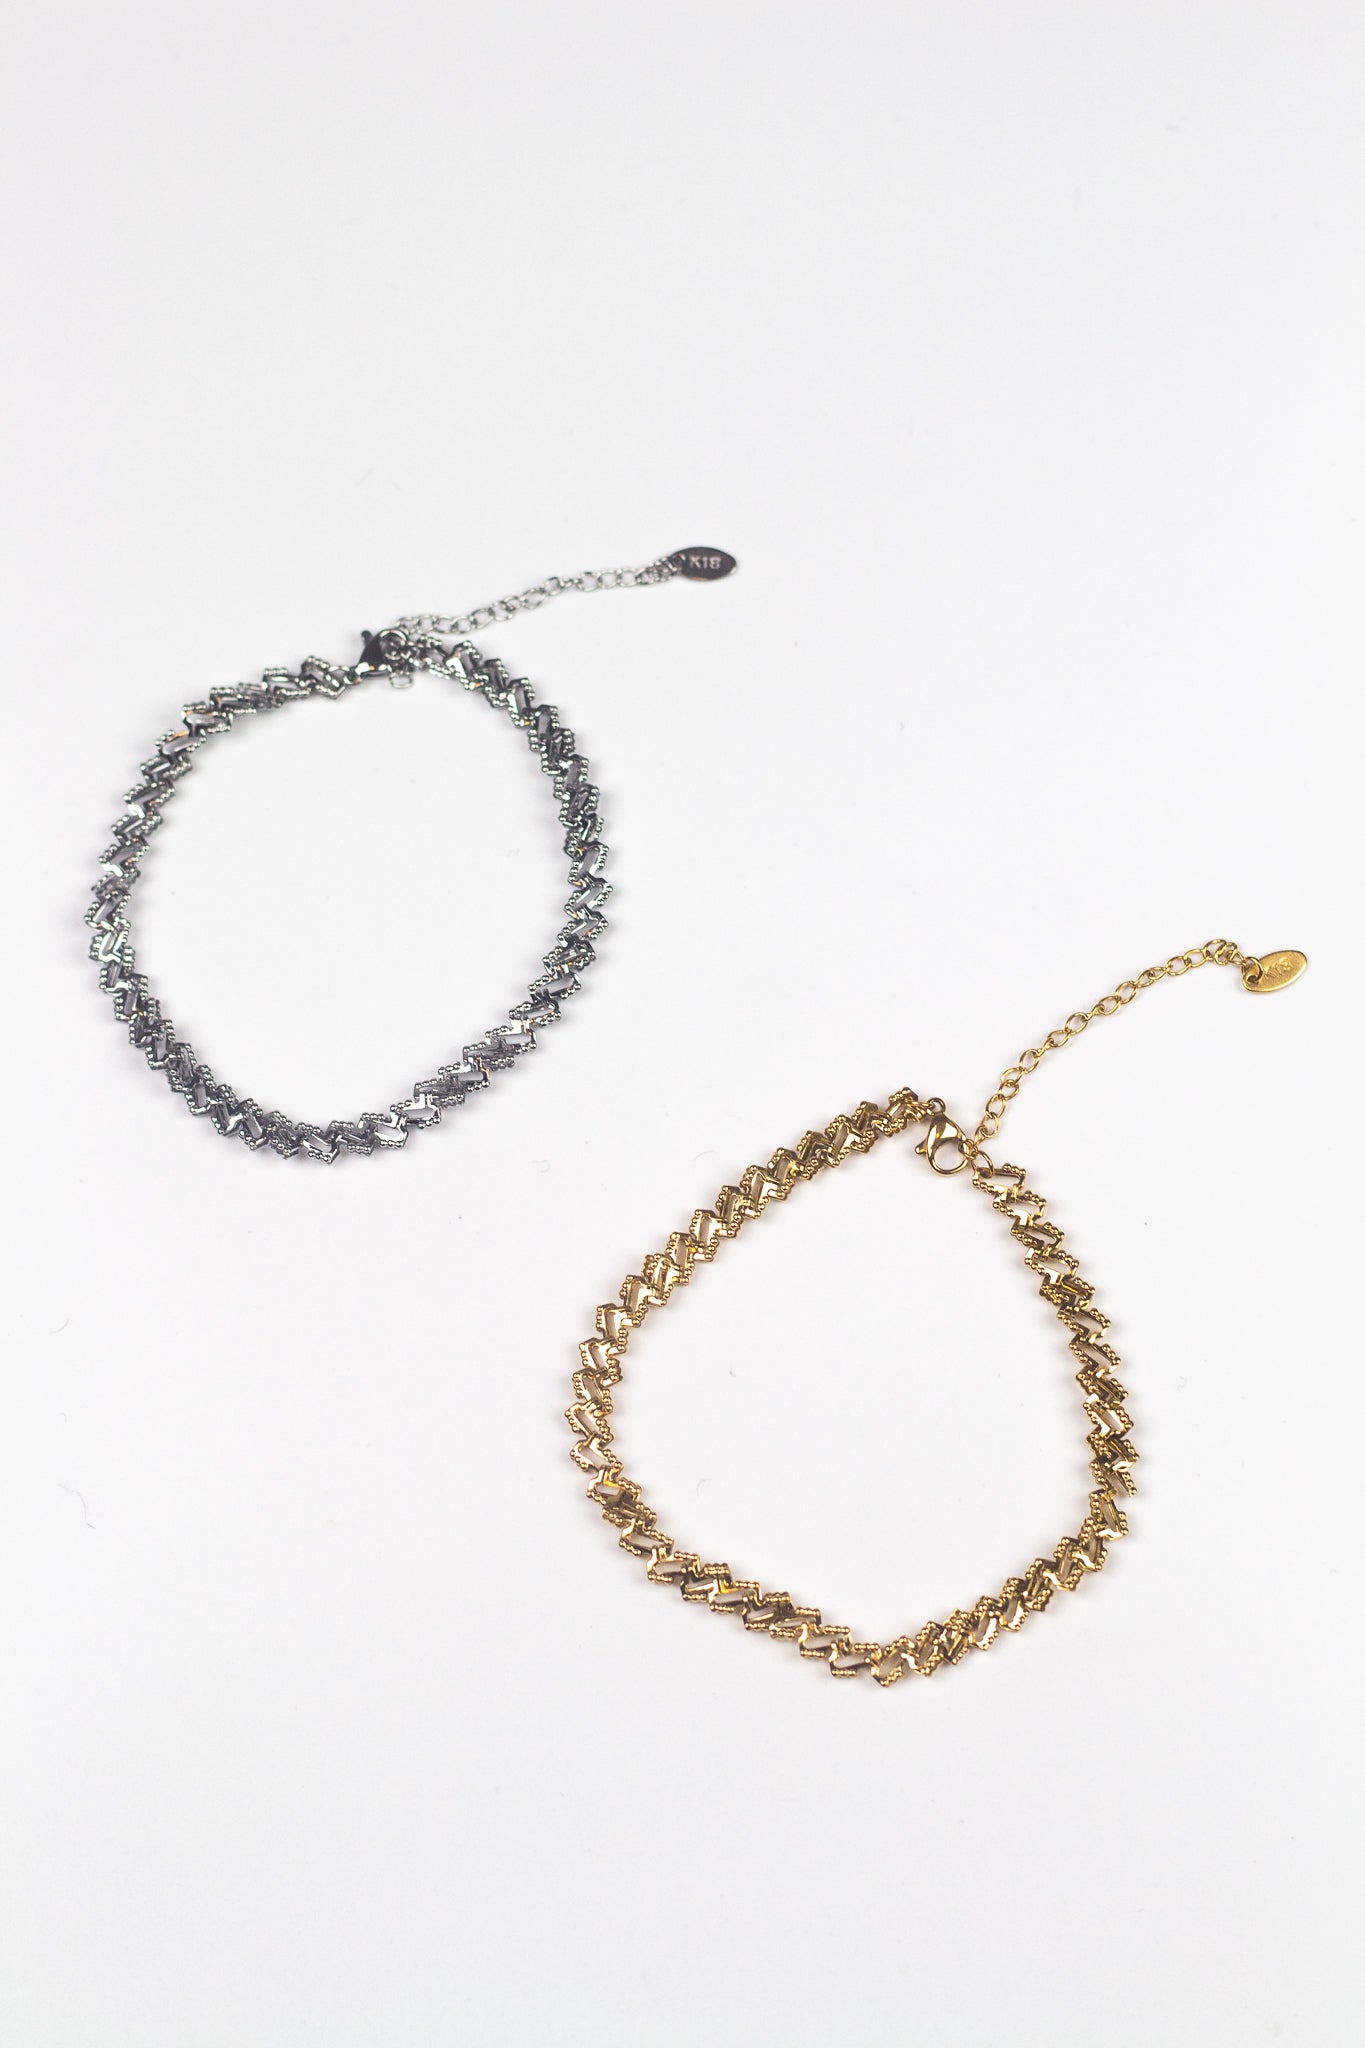 On the left is an 18k silver chain anklet. On the right is an 18k gold chain anklet. Ellina Link Chain Anklet by E's Element.